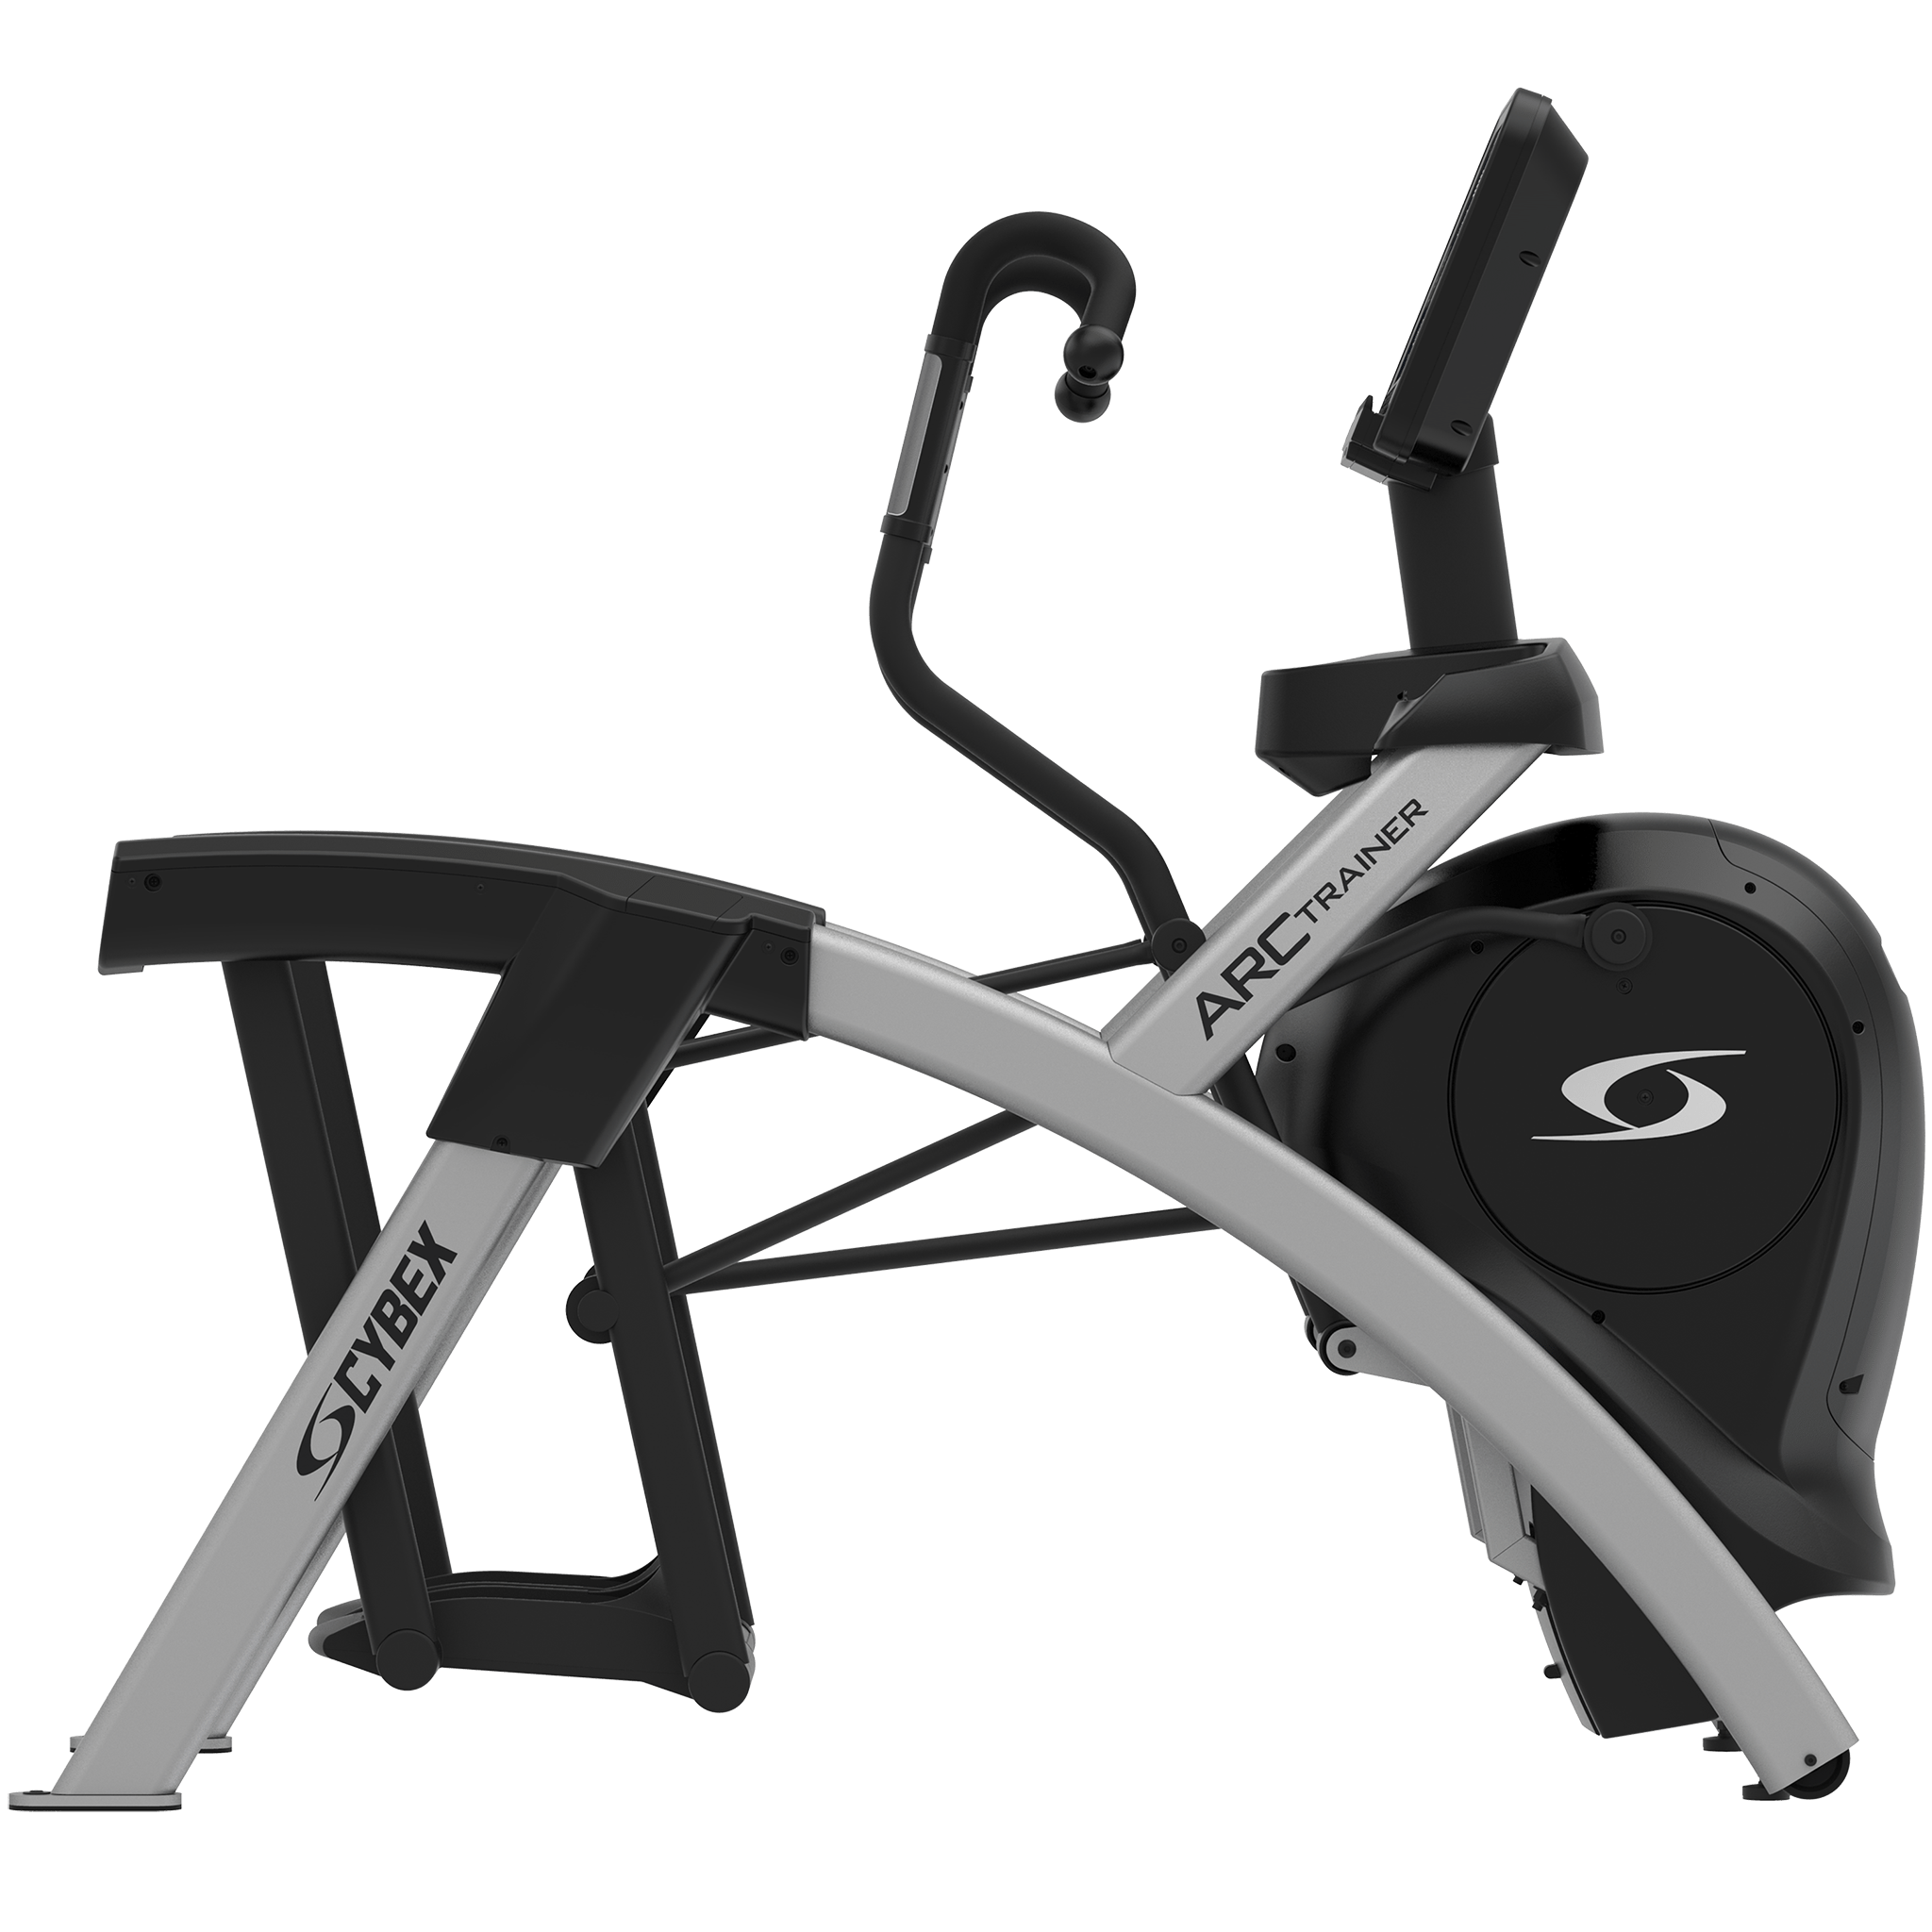 Cybex R Series Total Body Arc Trainer with 50L LED Display